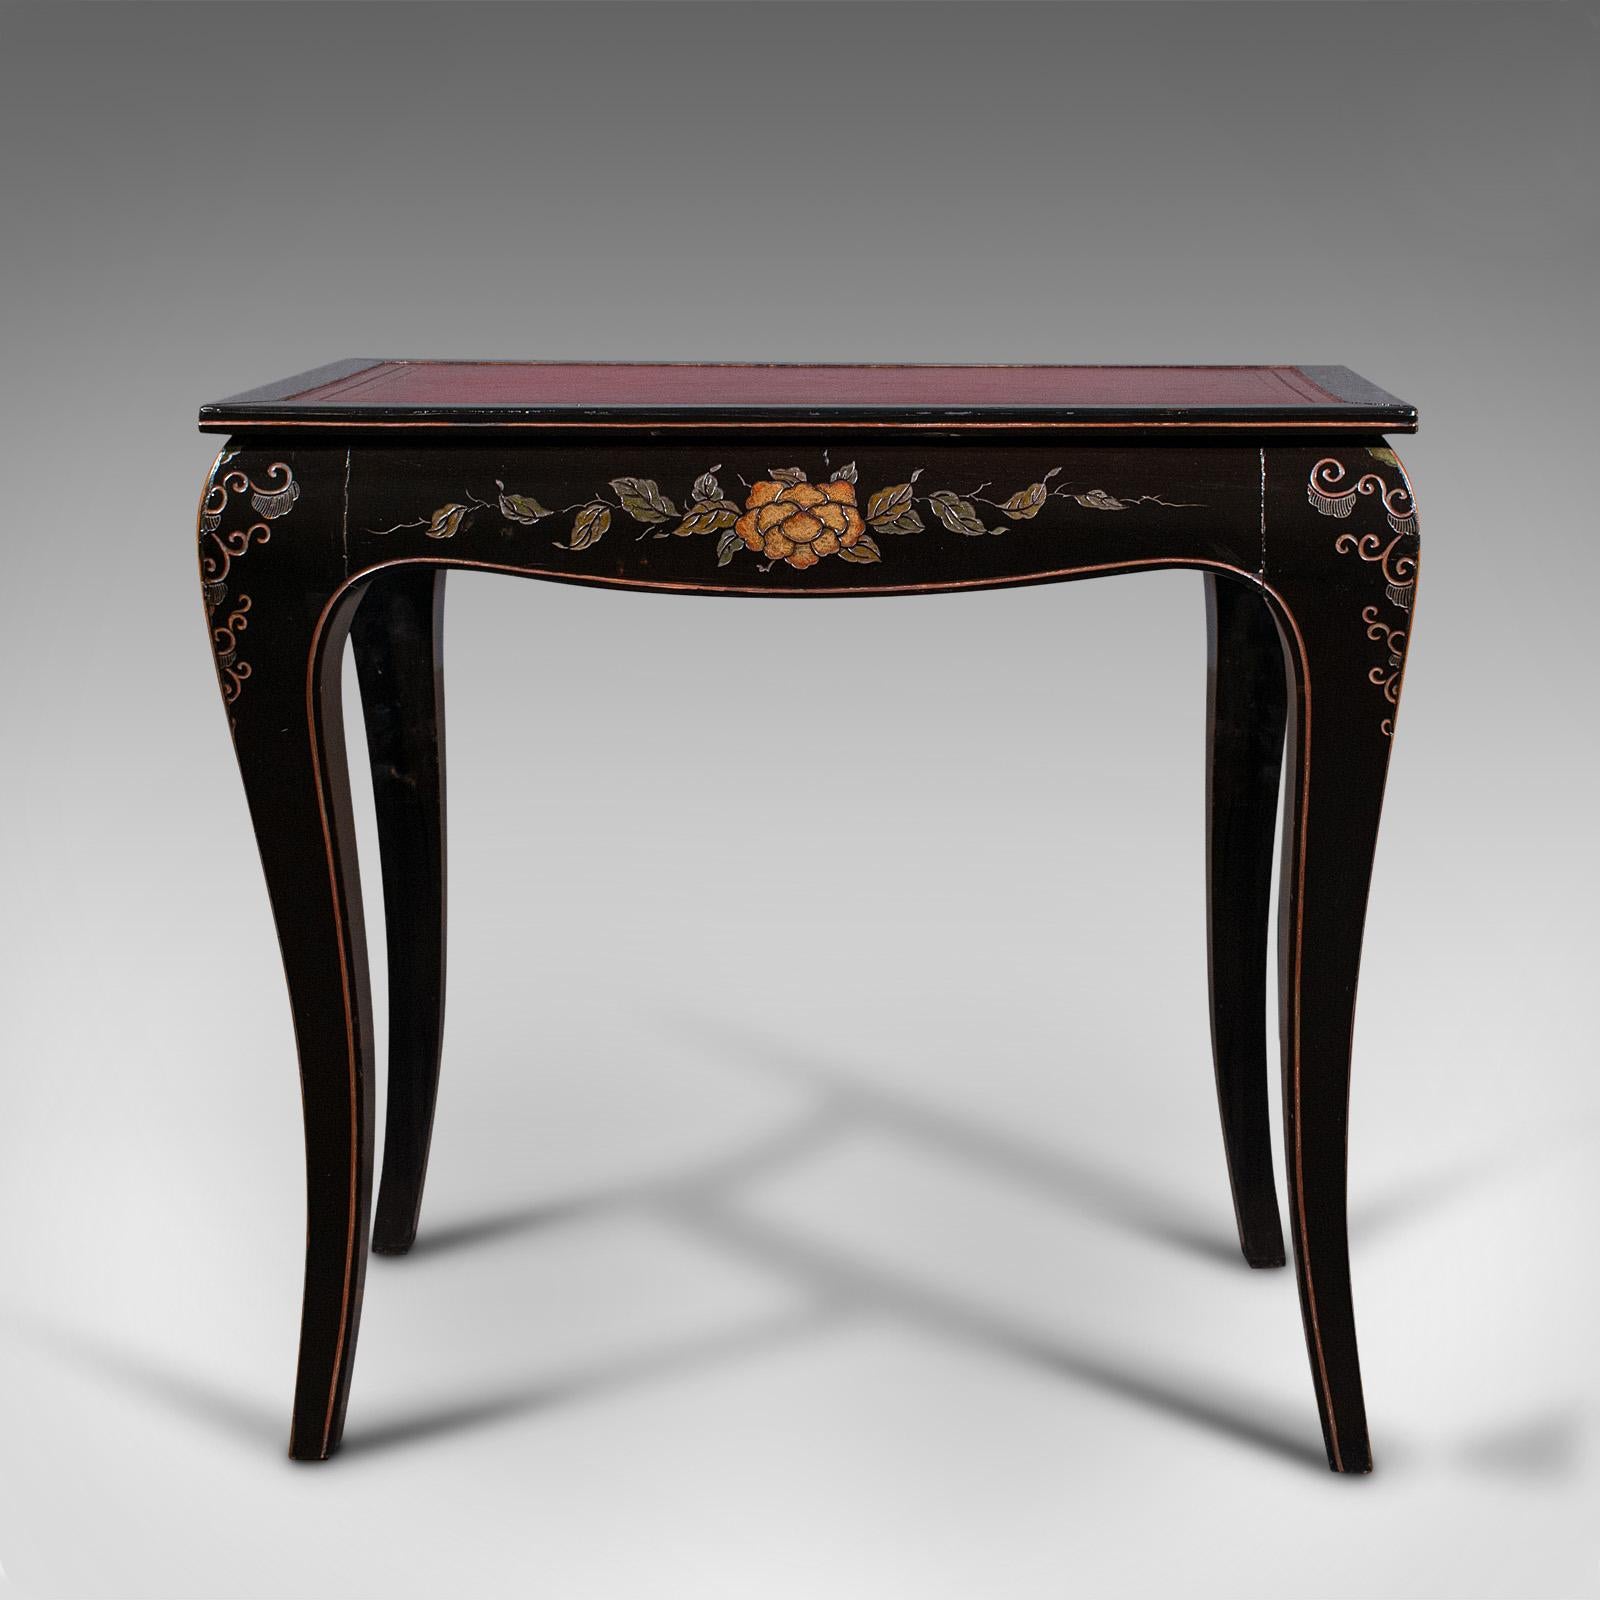 This is a vintage correspondence table. An Anglo-Chinese oak side table or writing desk with Japanned taste, dating to the Art Deco period, circa 1930.

Presenting beautifully, with fine detail and pleasing colour
Displaying a desirable aged